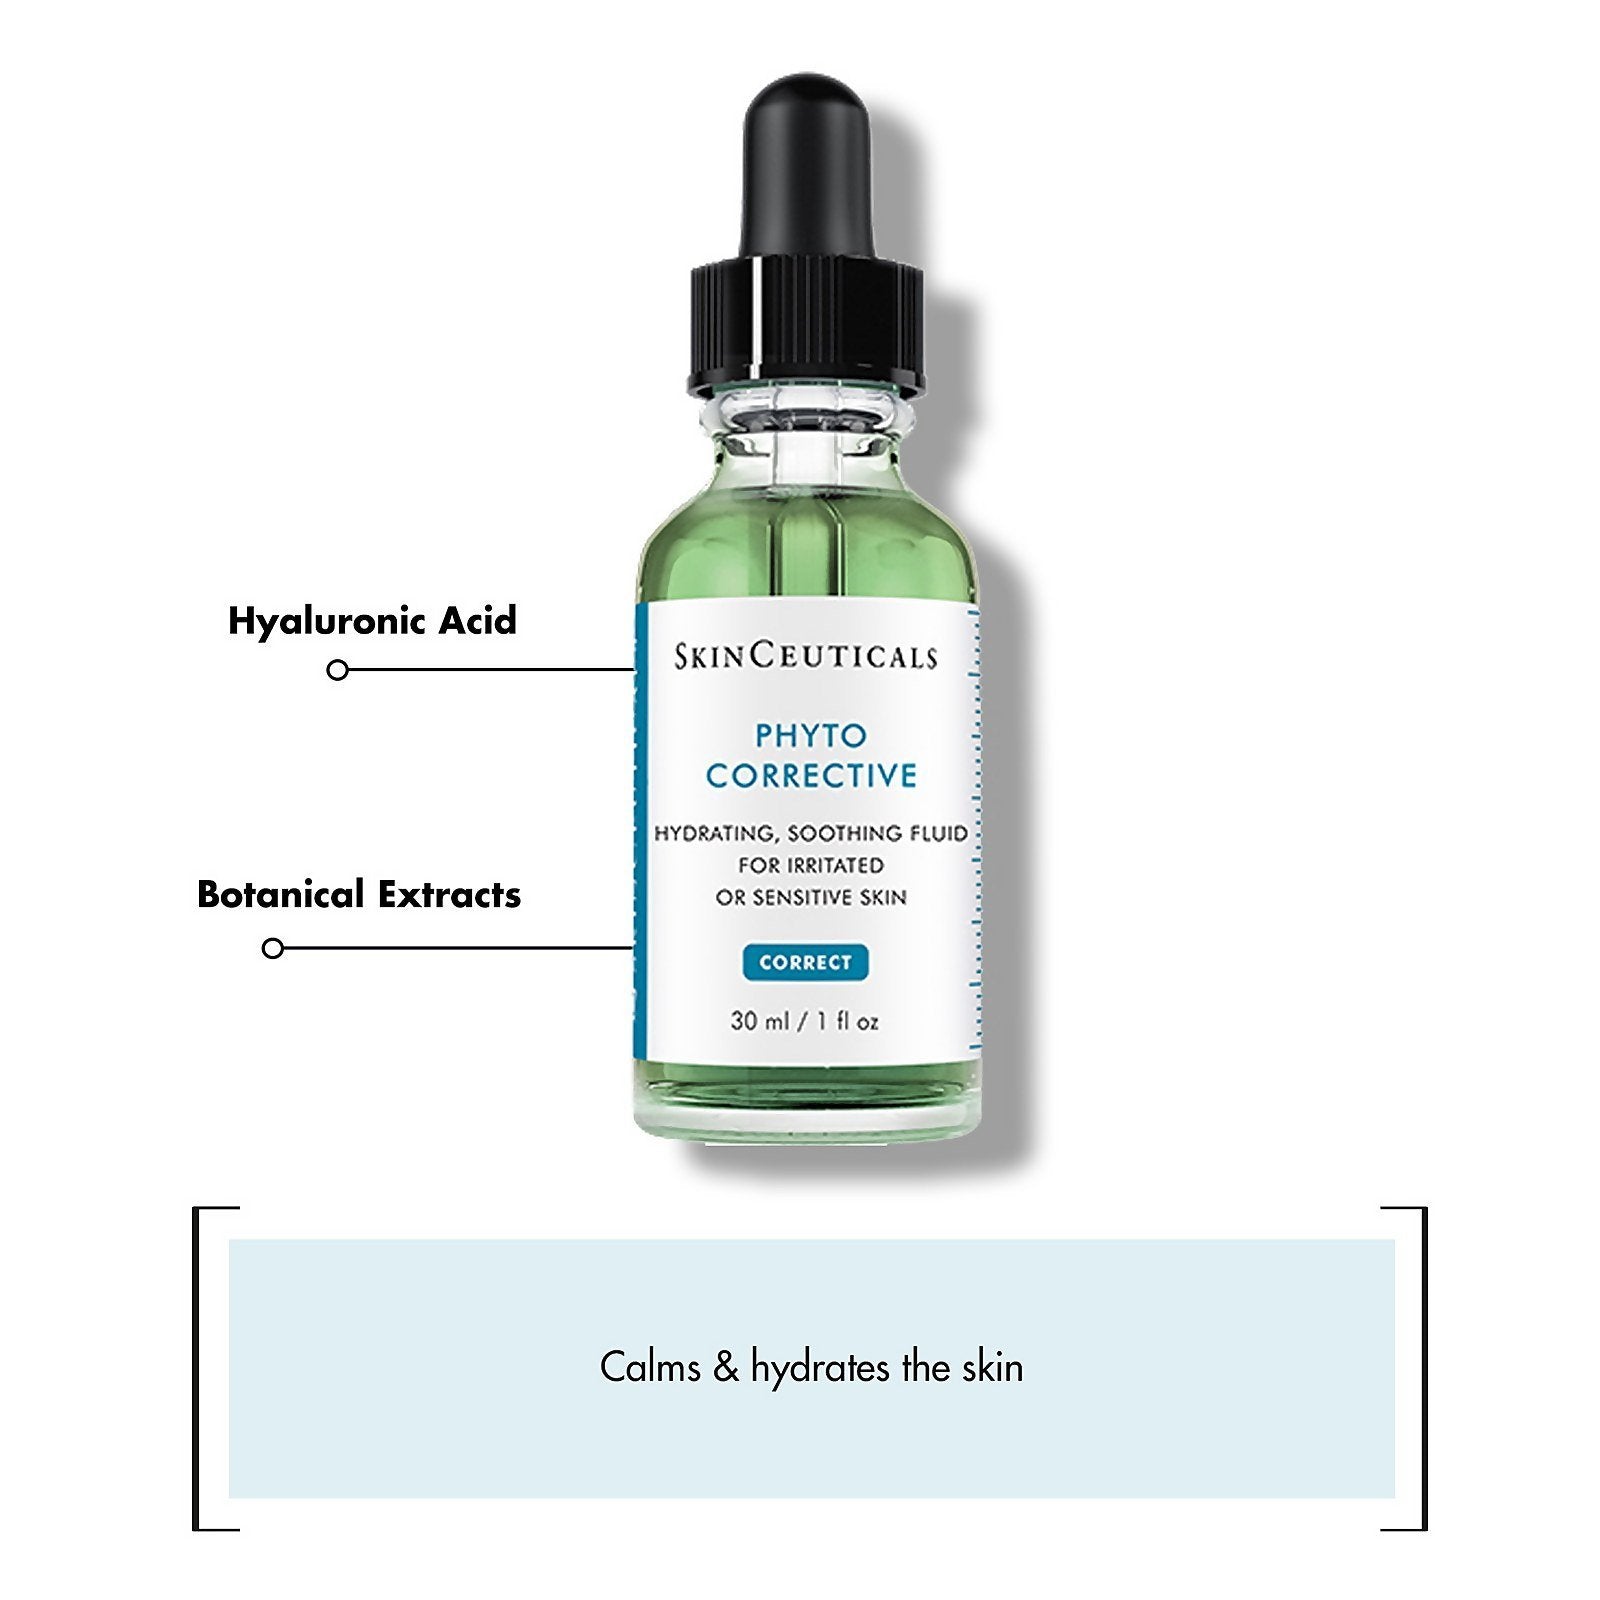 SkinCeuticals Phyto Corrective features SkinShop.ie